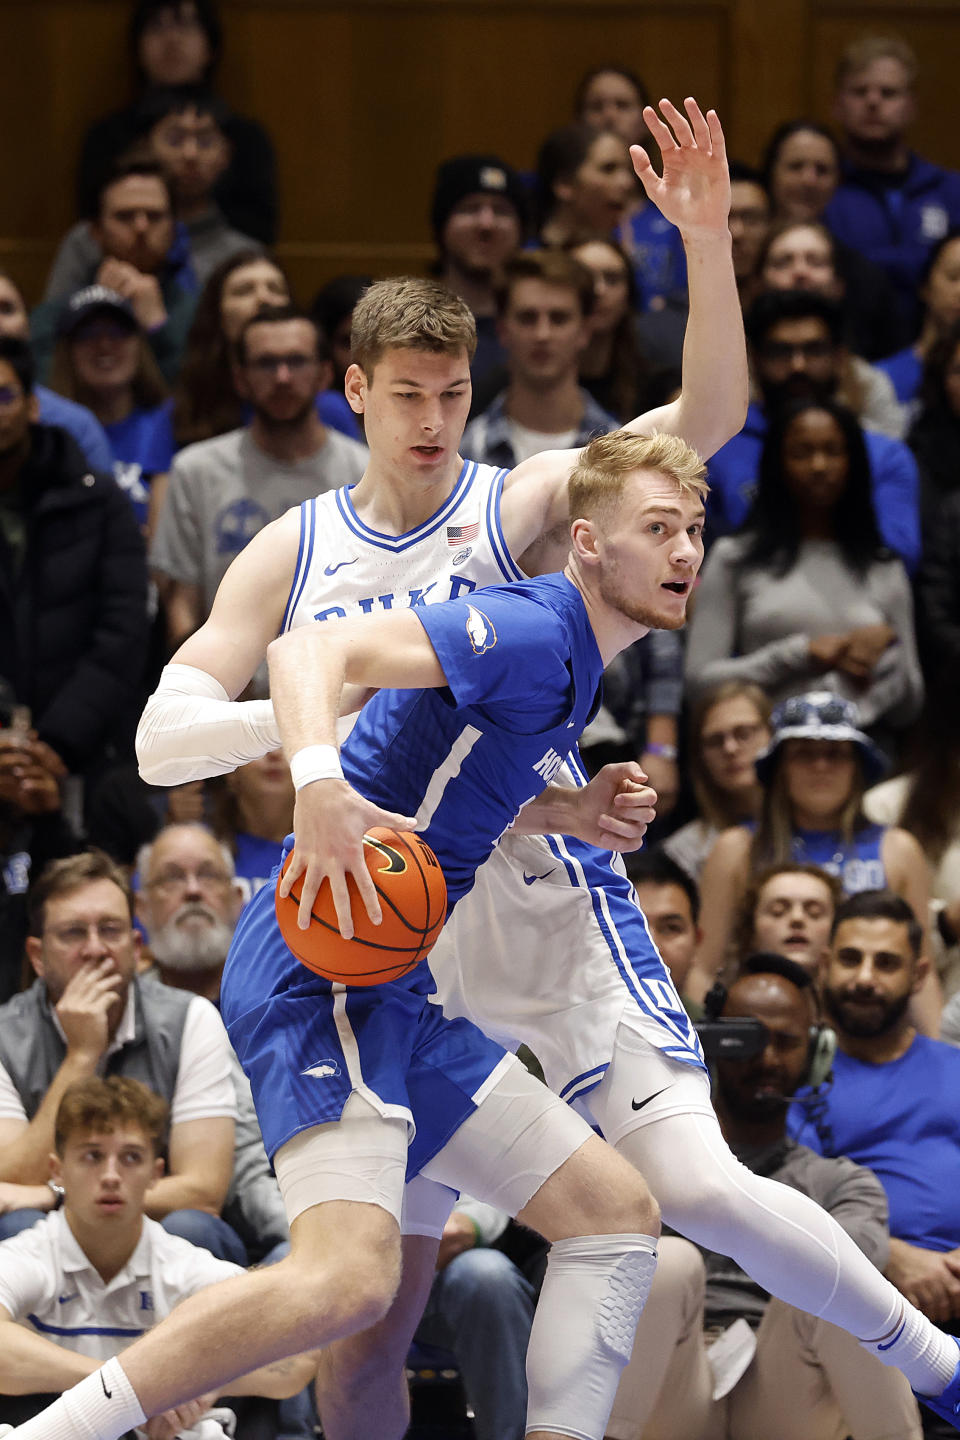 Hofstra's Jacco Fritz, front, looks for help when battling Duke's Kyle Filipowski, back, during the first half of an NCAA college basketball game in Durham, N.C., Tuesday, Dec. 12, 2023. (AP Photo/Karl B DeBlaker)